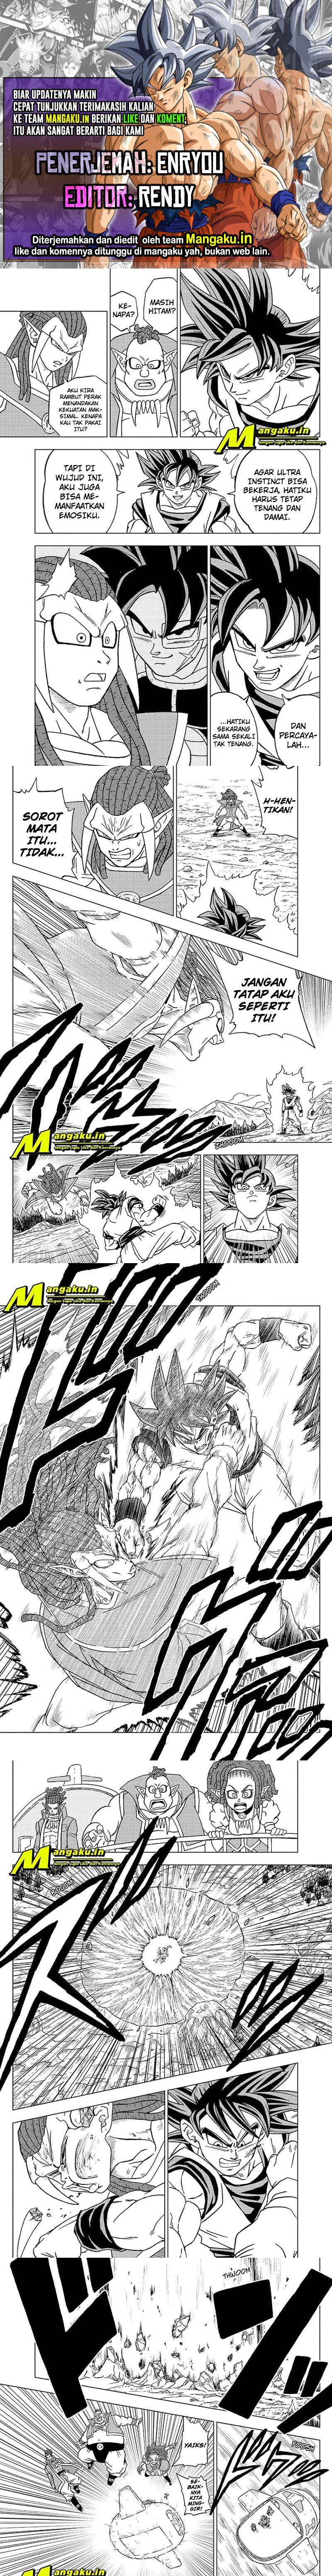 Dragon Ball Super: Chapter 85.2 - Page 1